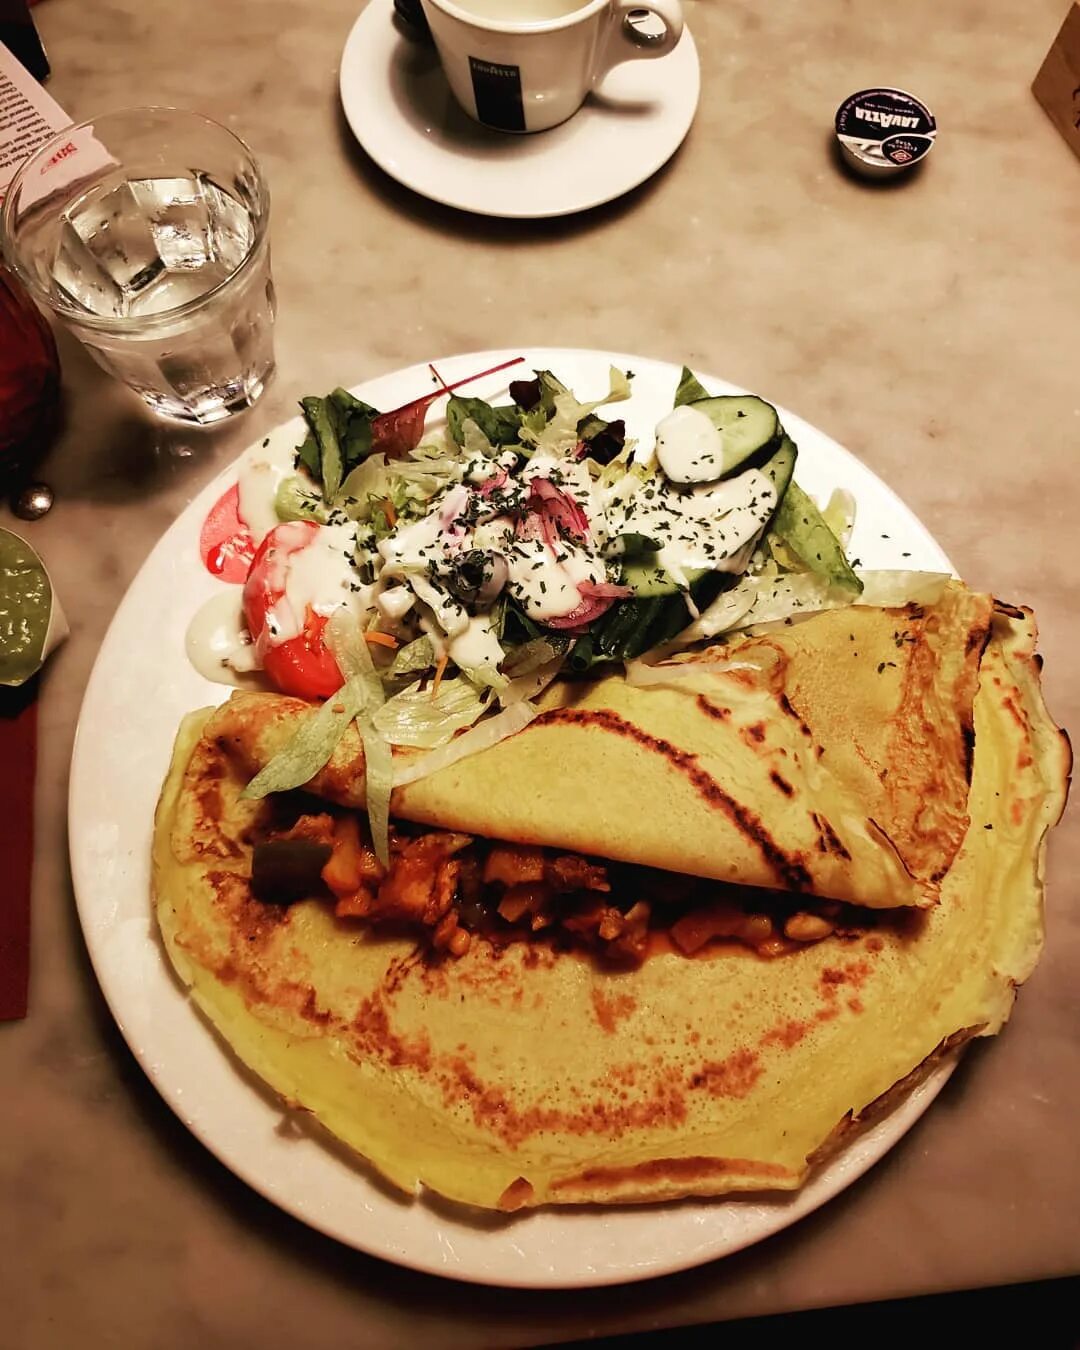 This is the Mexican pancake, full of chicken, veggies and…” 